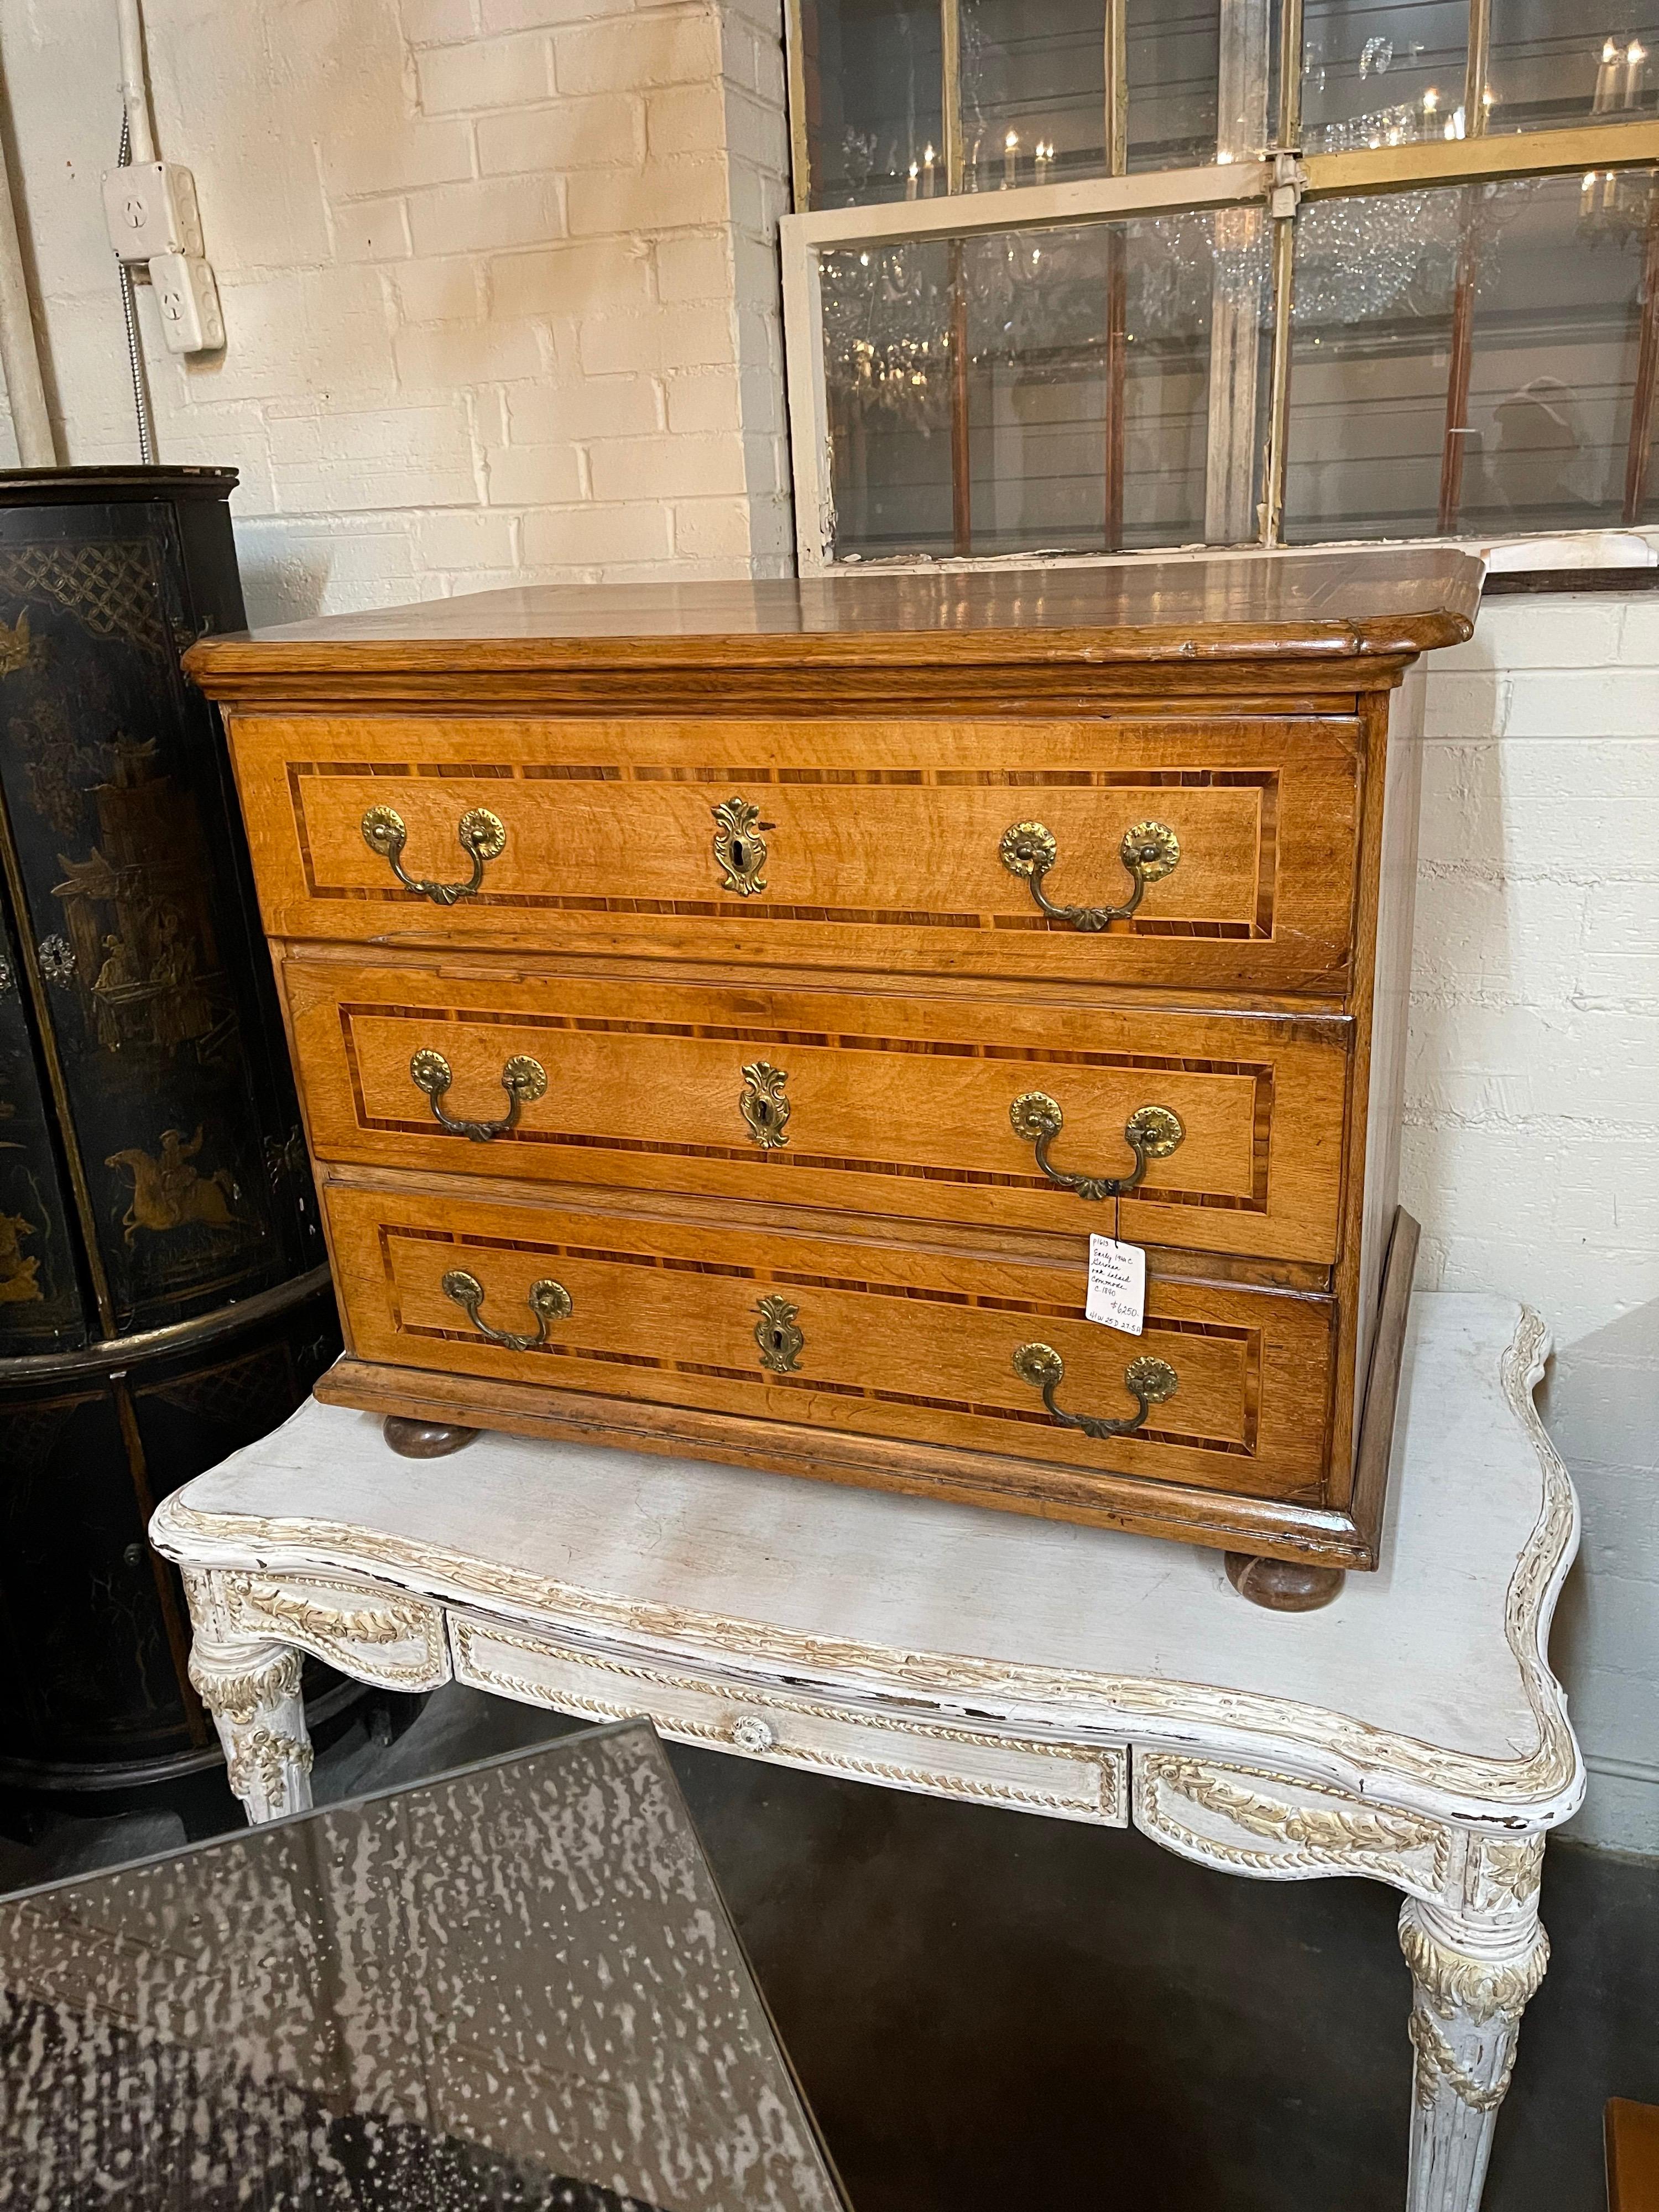 Understated 19th century German tiger oak and rosewood banded commode with inlaid top. The three drawers with tastefully appointed brass pulls and escutcheons. 

The entire raised on carved bun feet.

Superb slightly faded patina,

circa 1840.